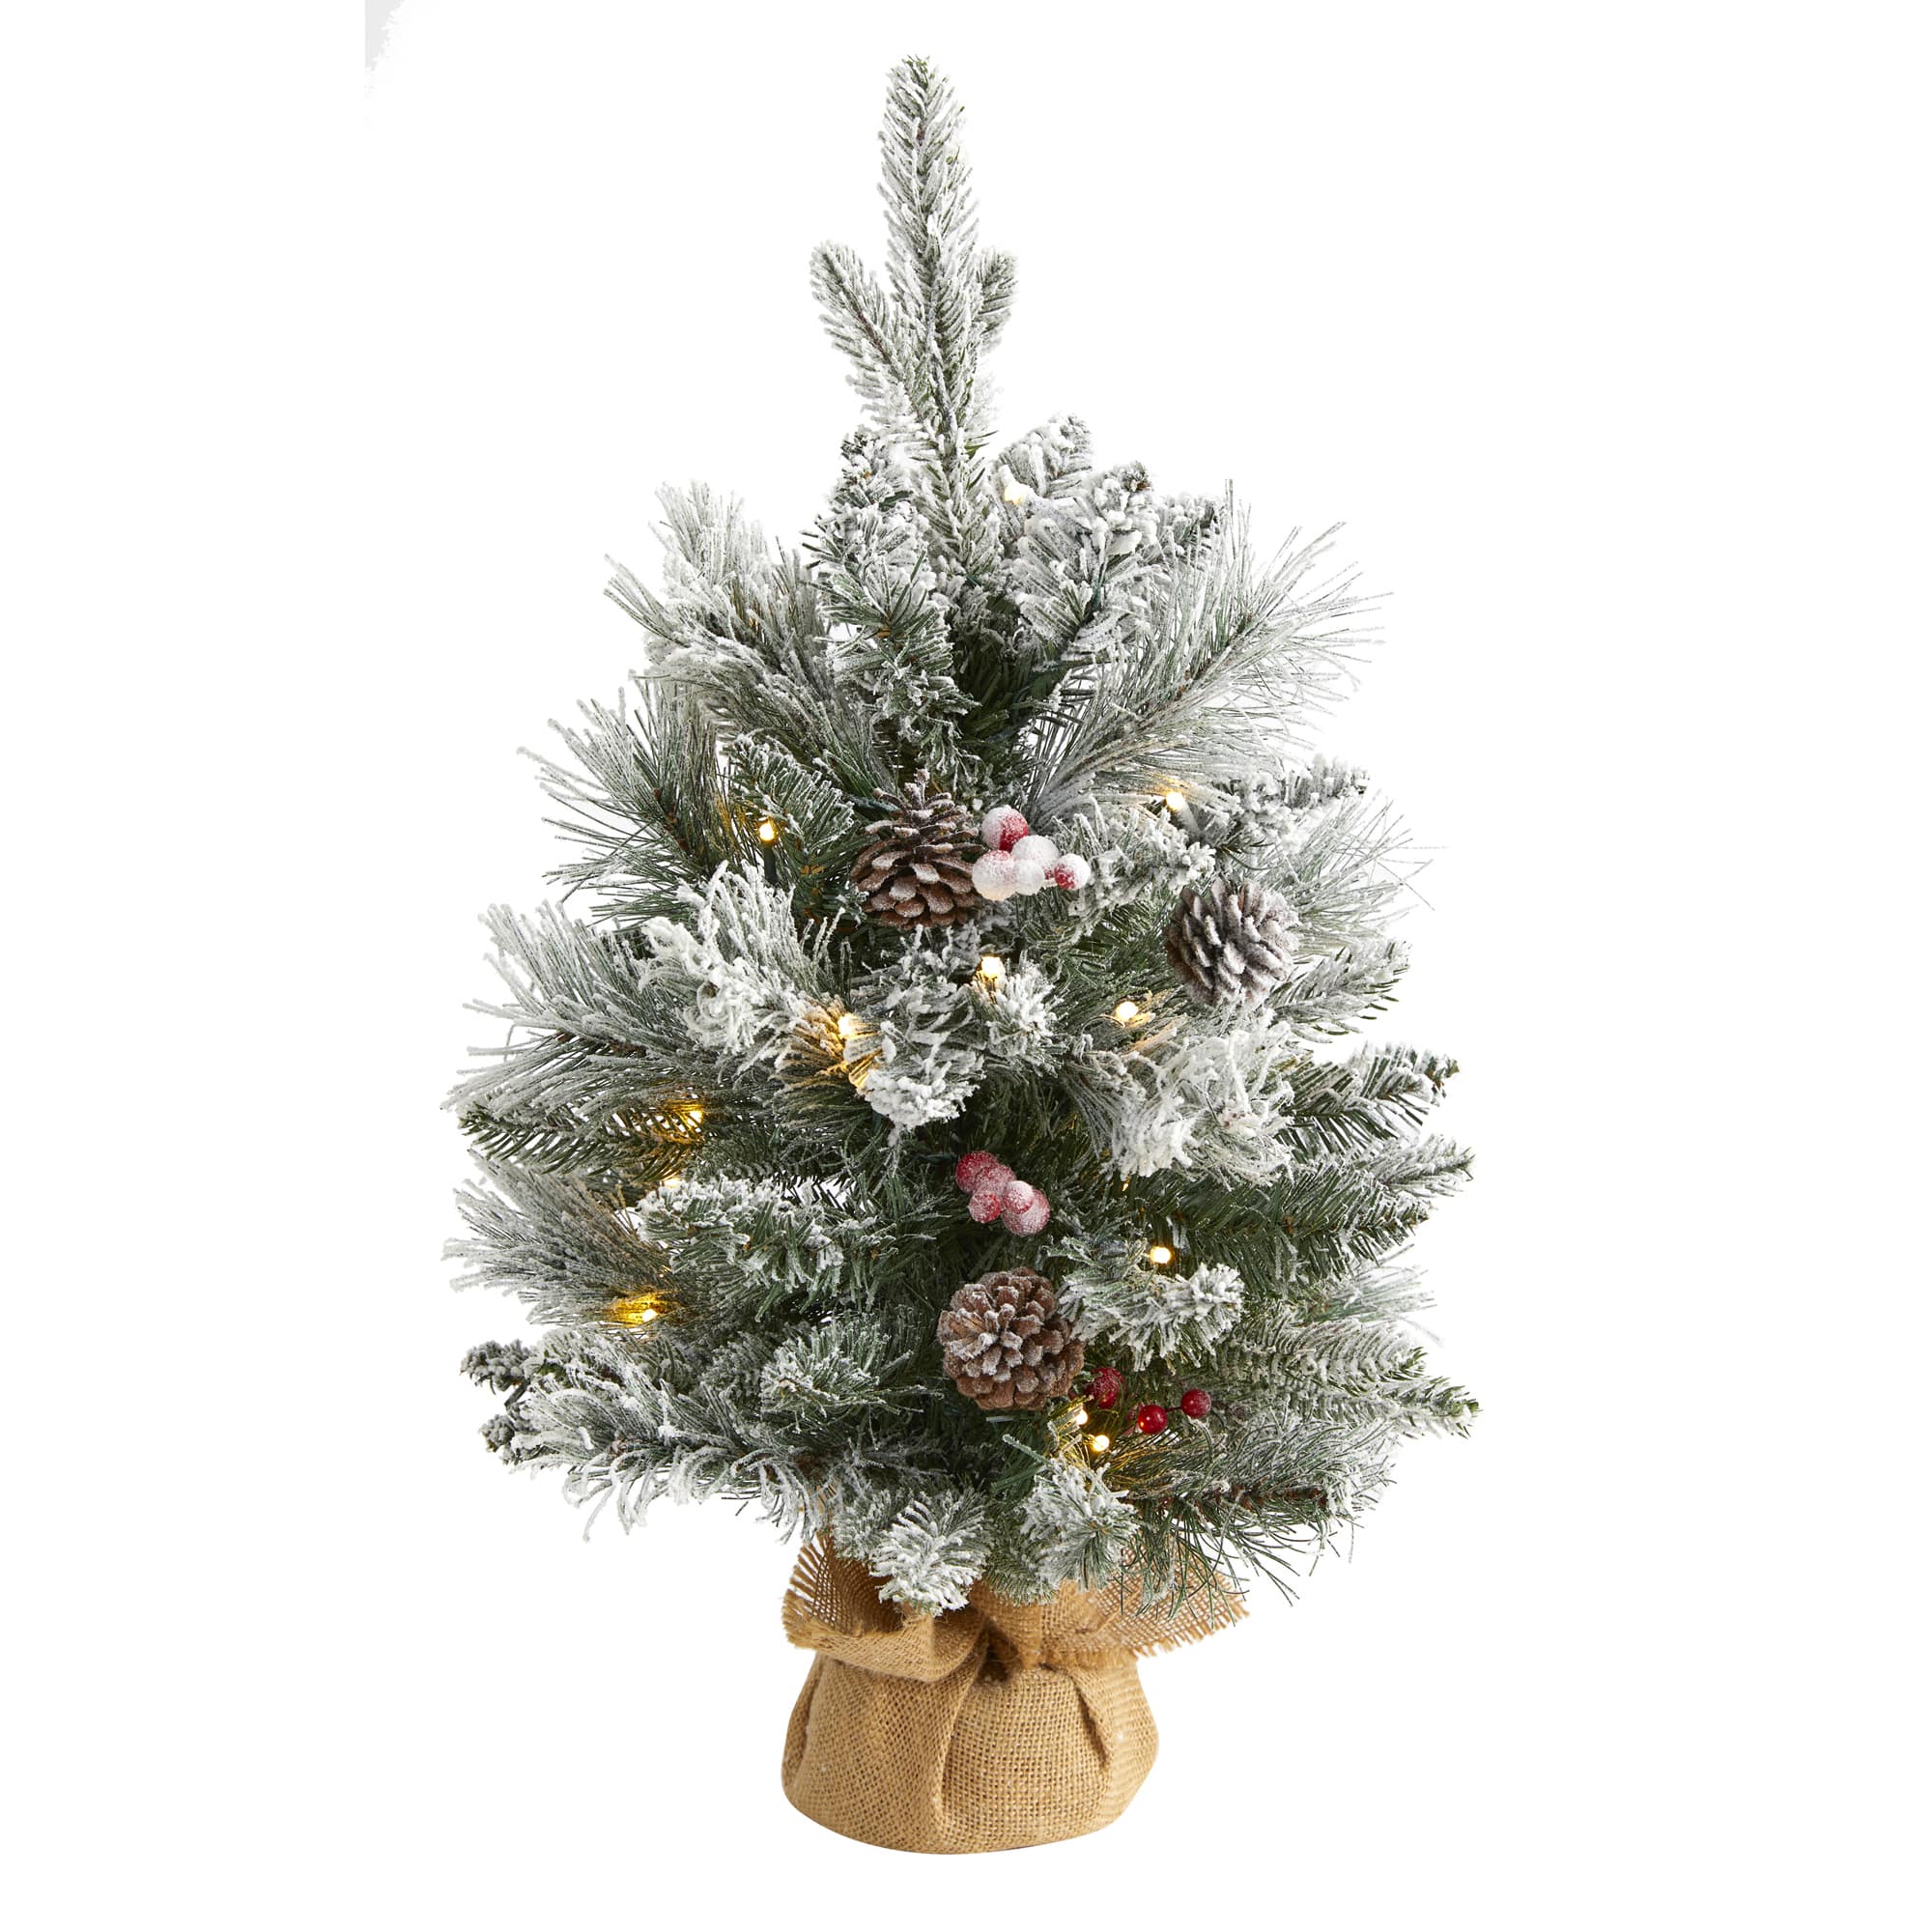 The Tabletop Prelit Holiday Christmas Tree 2' Tall Pre-Decorated LED Light 